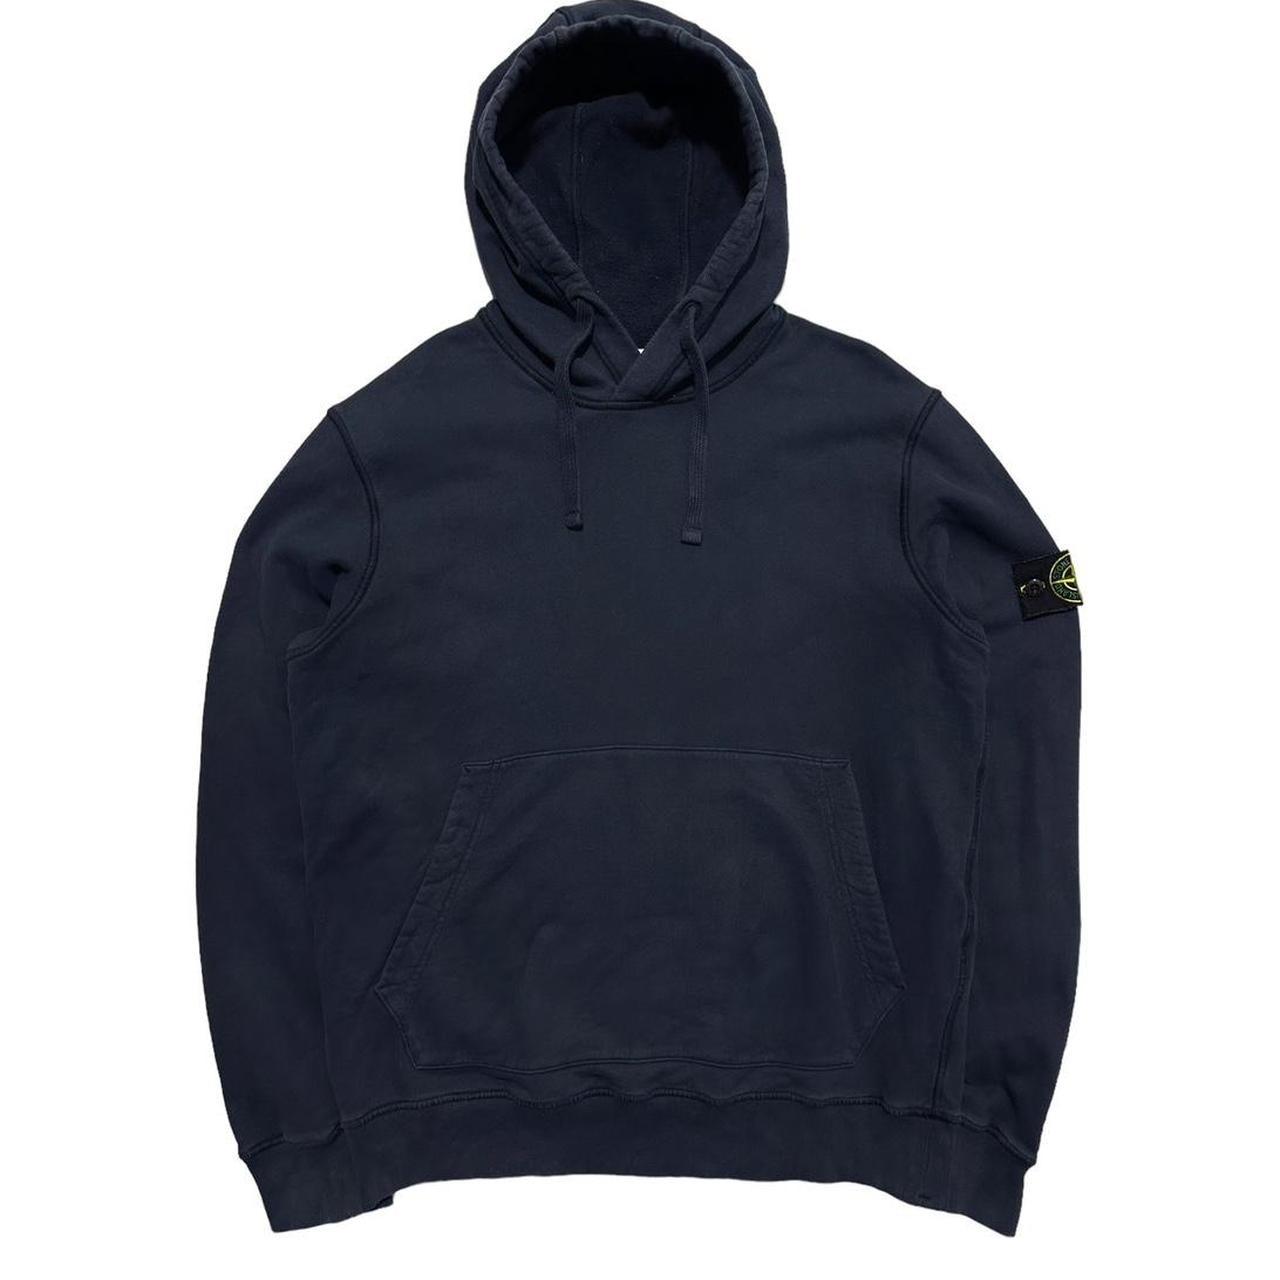 Stone Island Pullover Navy Hoodie - Known Source